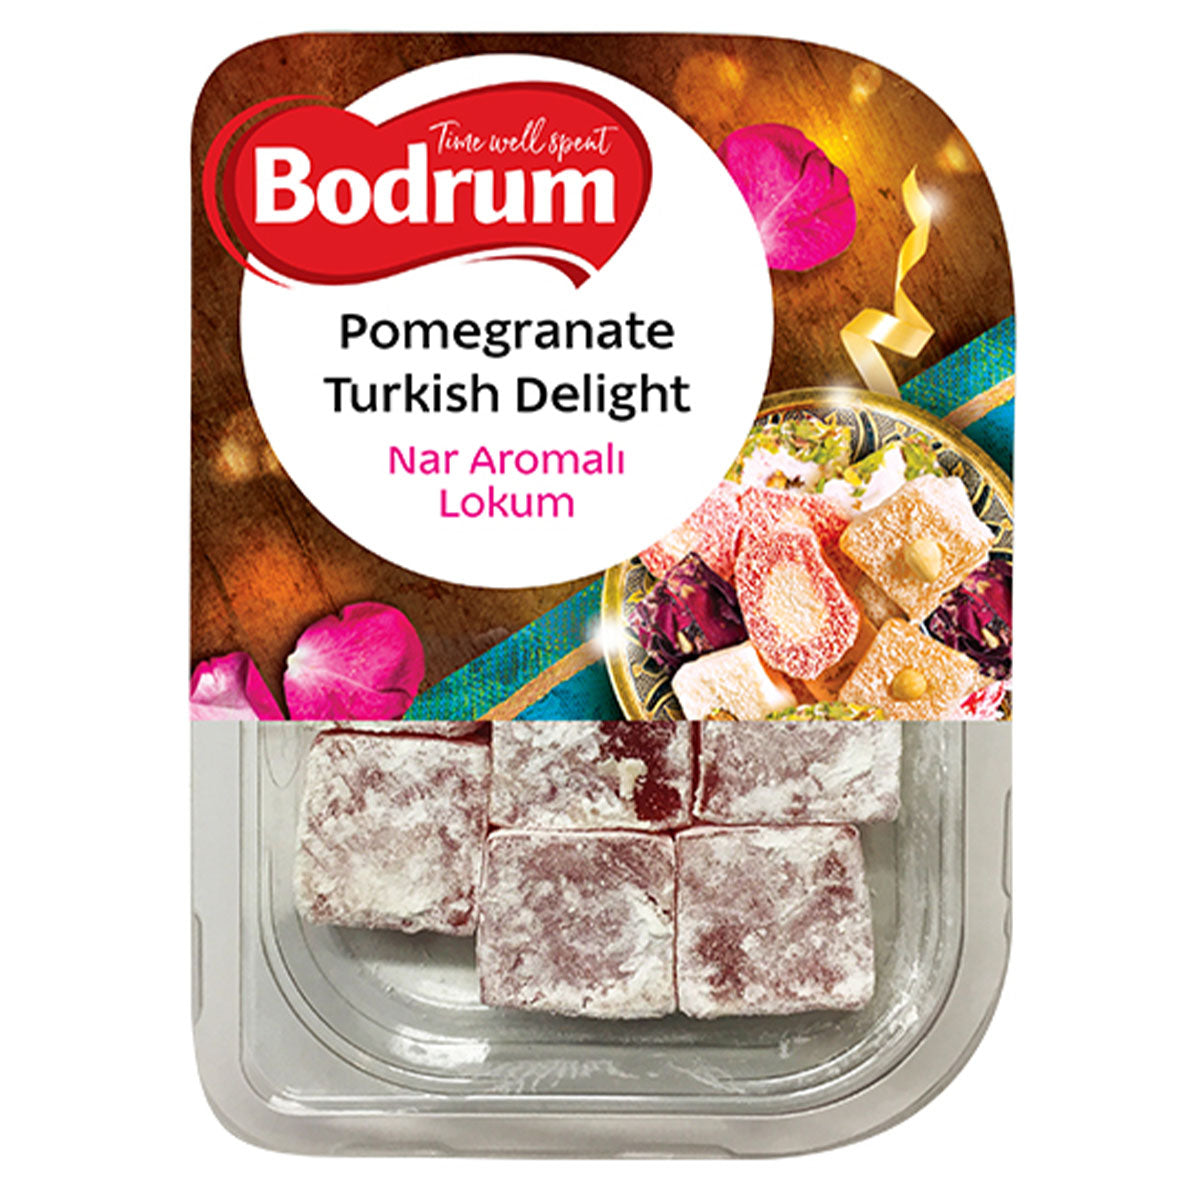 Bodrum - Pomegranate Turkish Delight - 200g - Continental Food Store